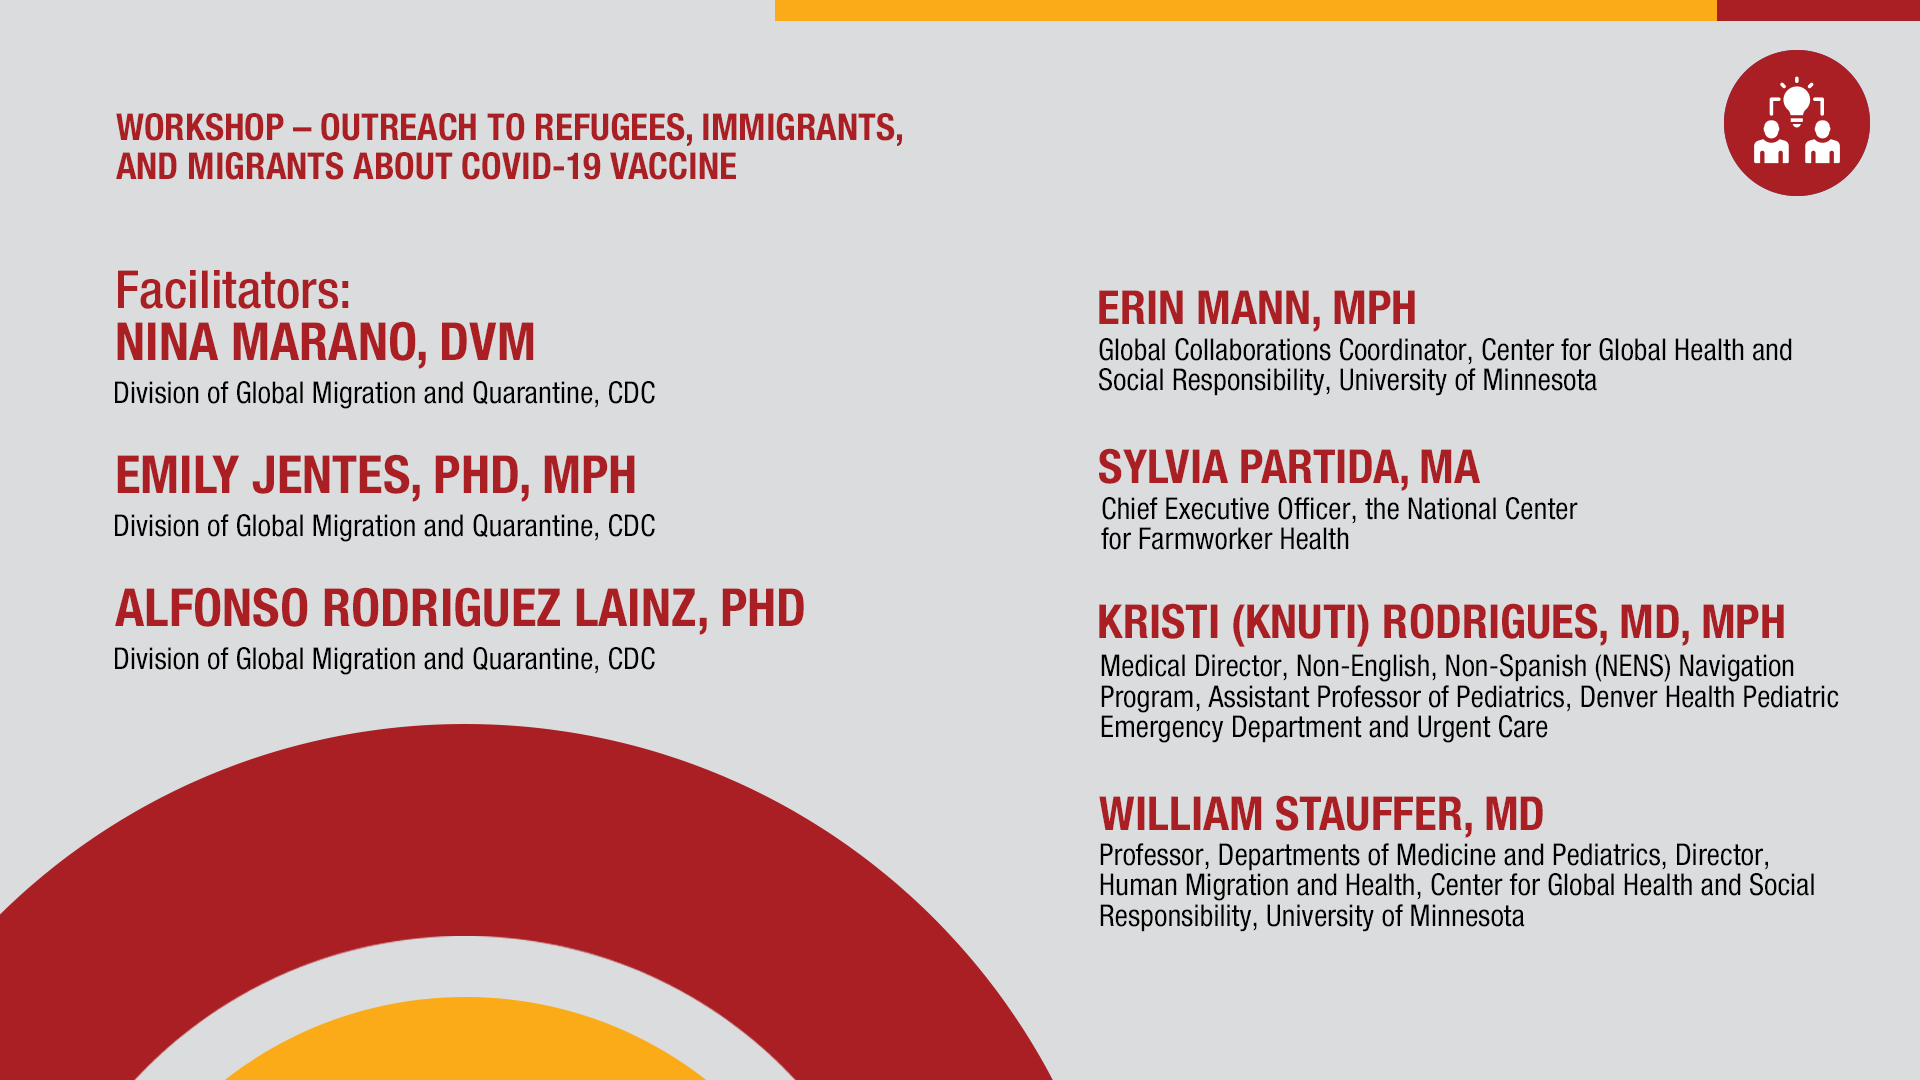 National Forum on COVID-19 Vaccine Workshop: Outreach to refugees, immigrants, and migrants about COVID-19 Vaccine